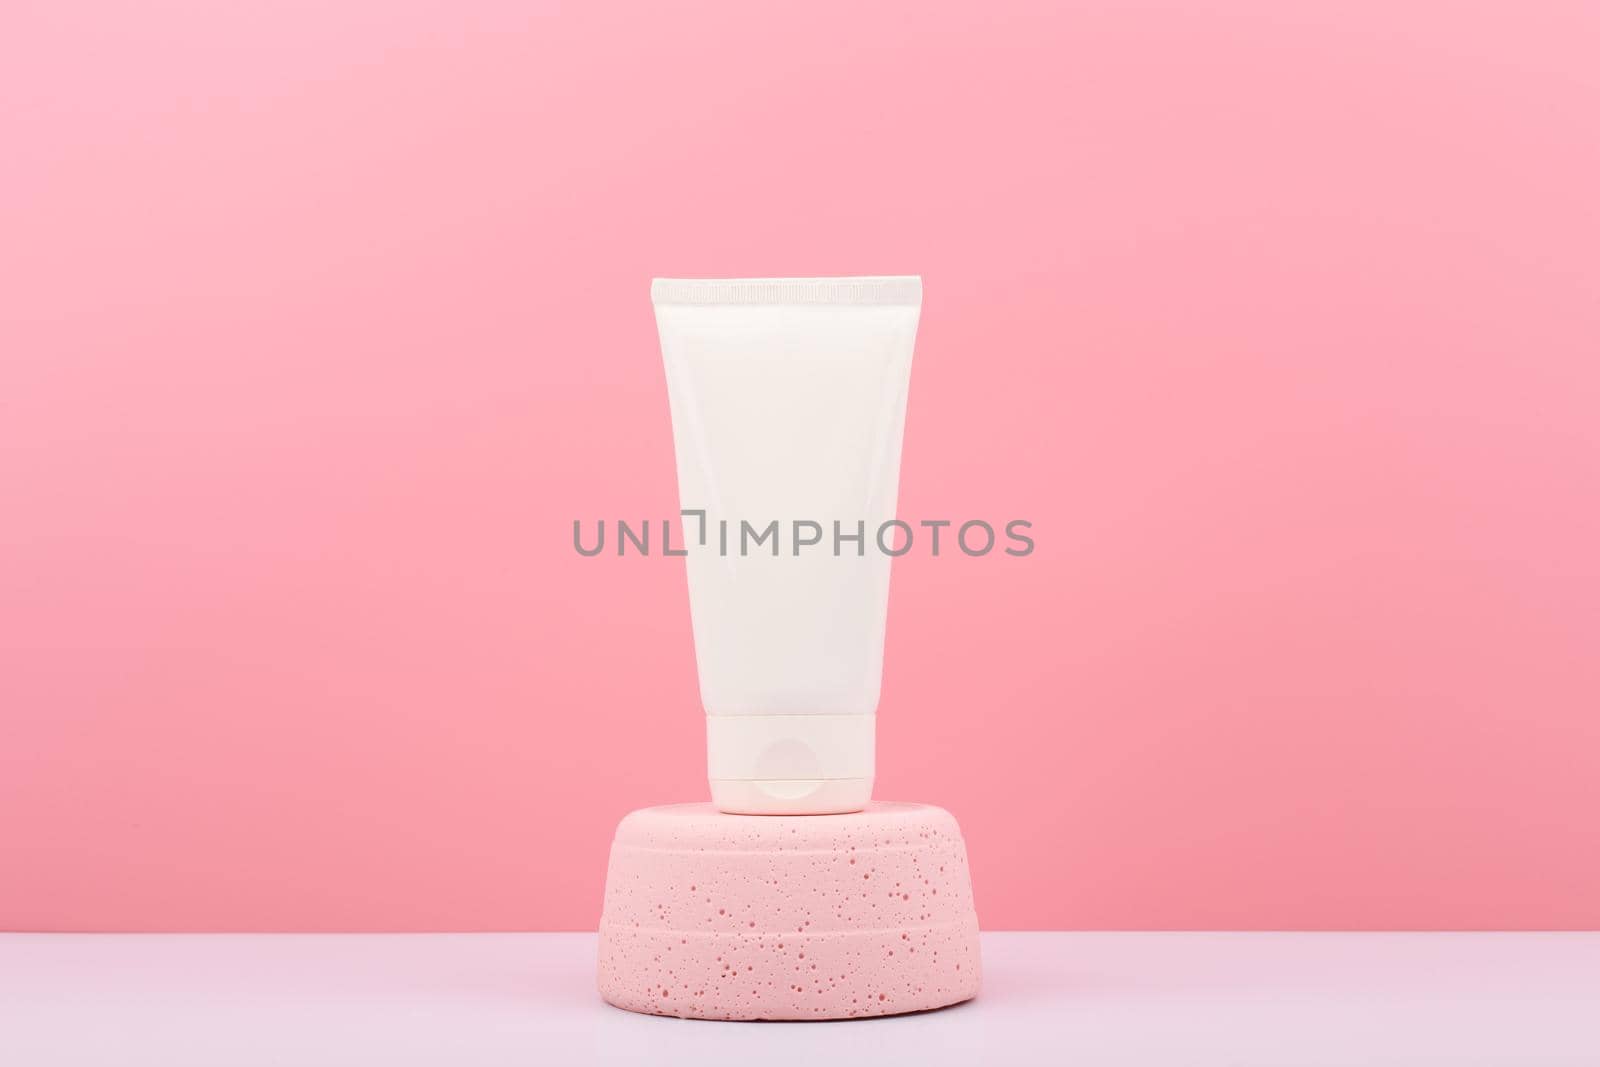 White plastic cosmetic tube with cream, balm, mask, scrub or lotion on pink pedestal against pink background with copy space. Concept of natural organic skin care products 